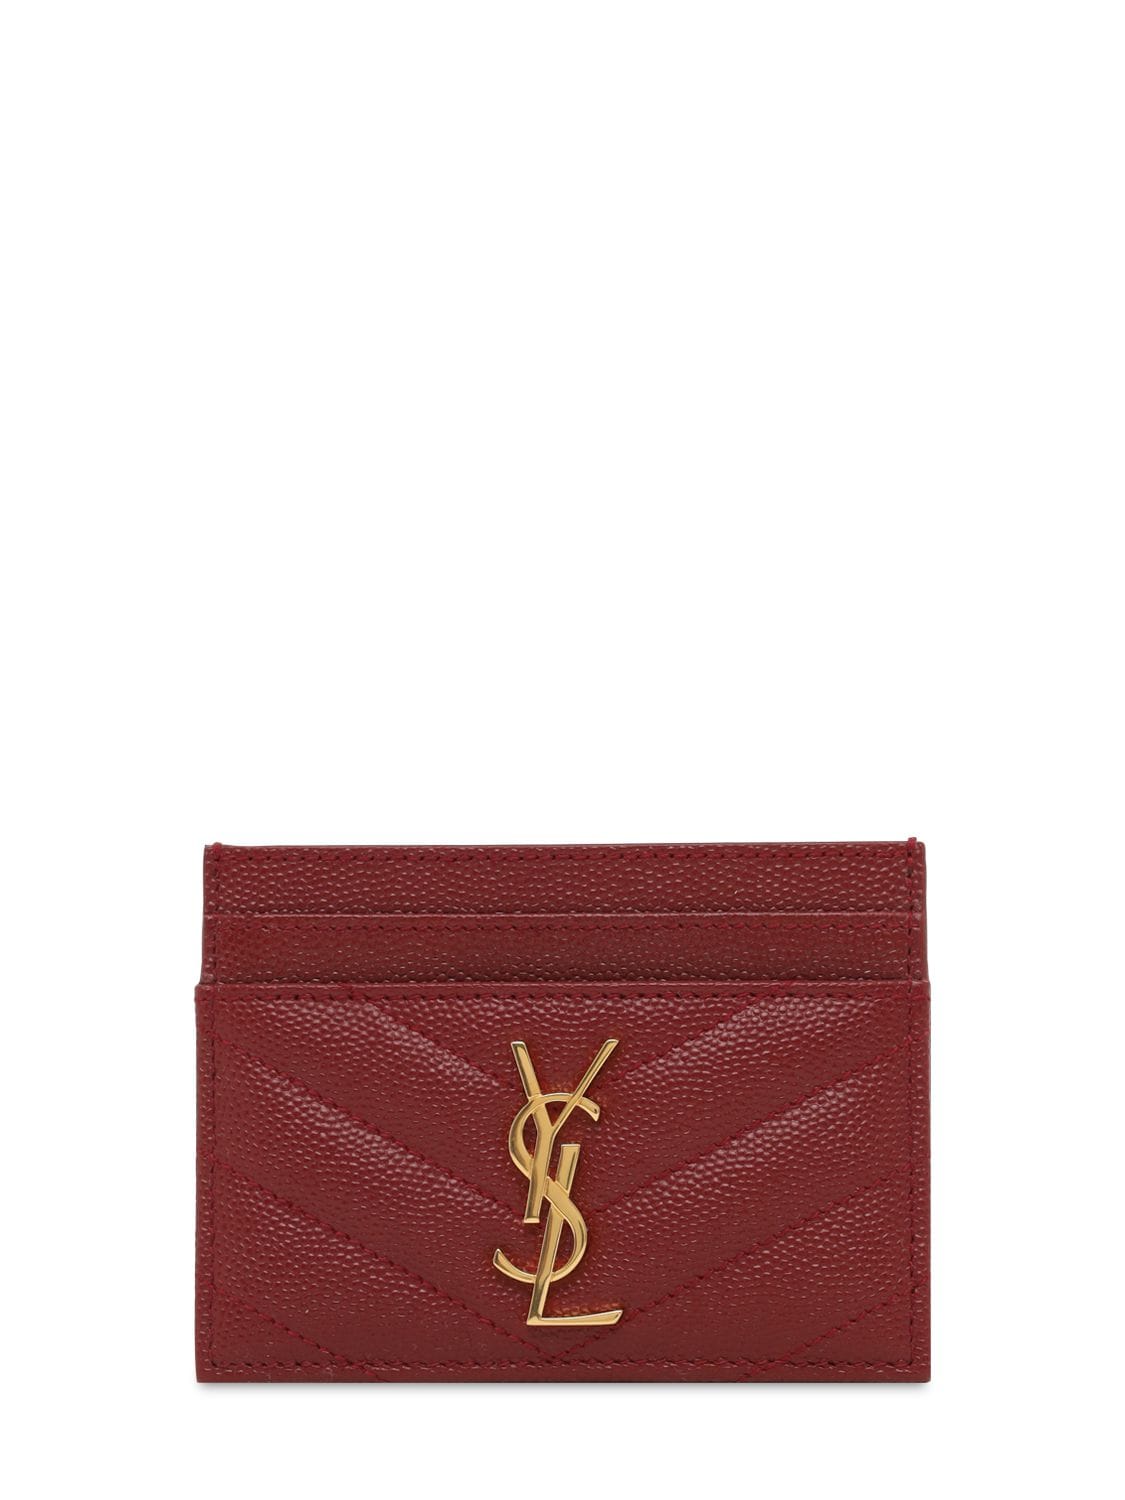 Saint Laurent Monogram Grained Leather Card Holder In Opyum Red